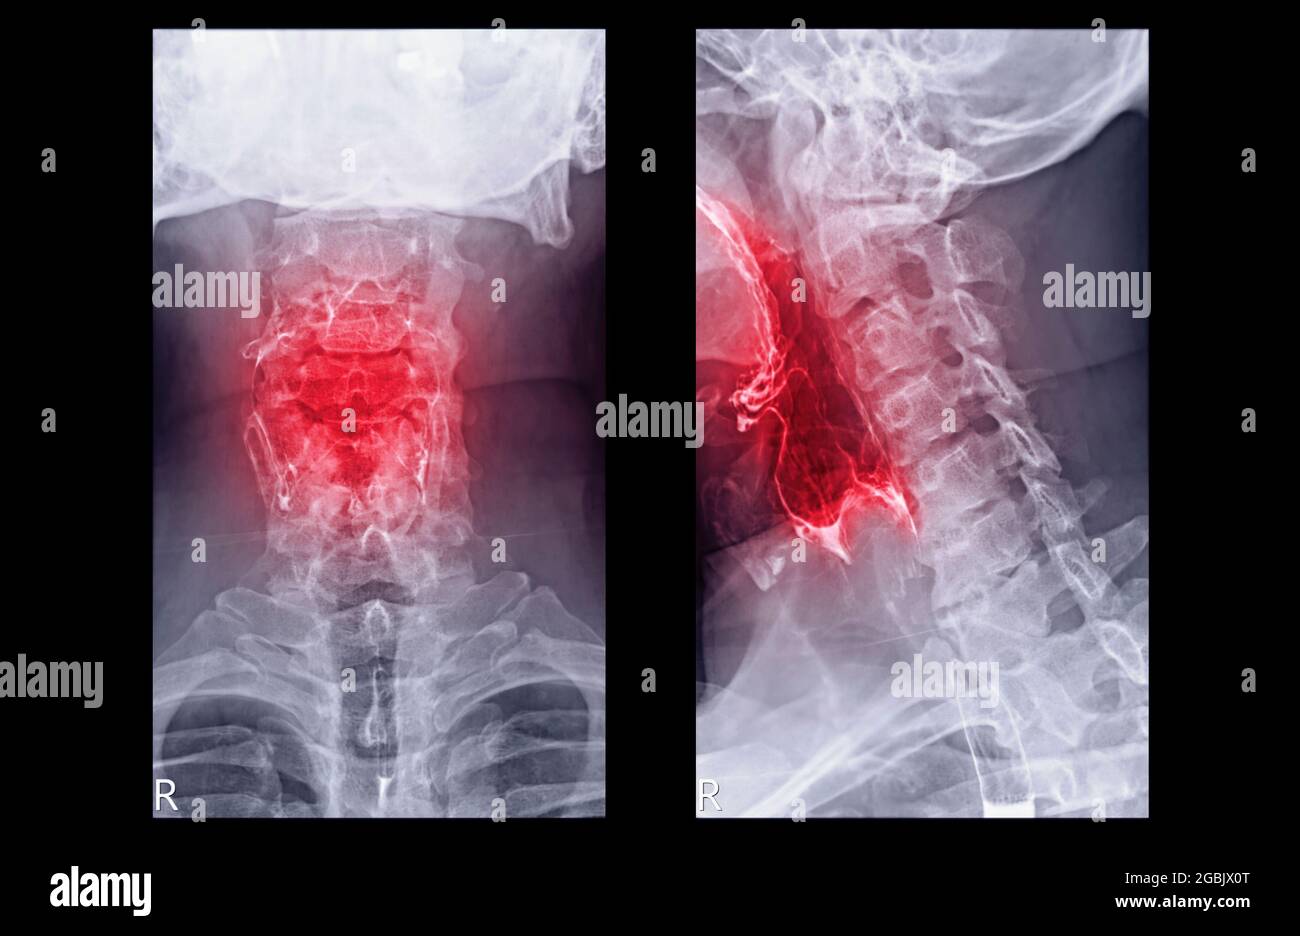 Esophagram or Barium swallow AP and Lateral view  showing esophagus for diagnosis GERD or Gastroesophageal reflux disease and Esophageal cancer. Stock Photo